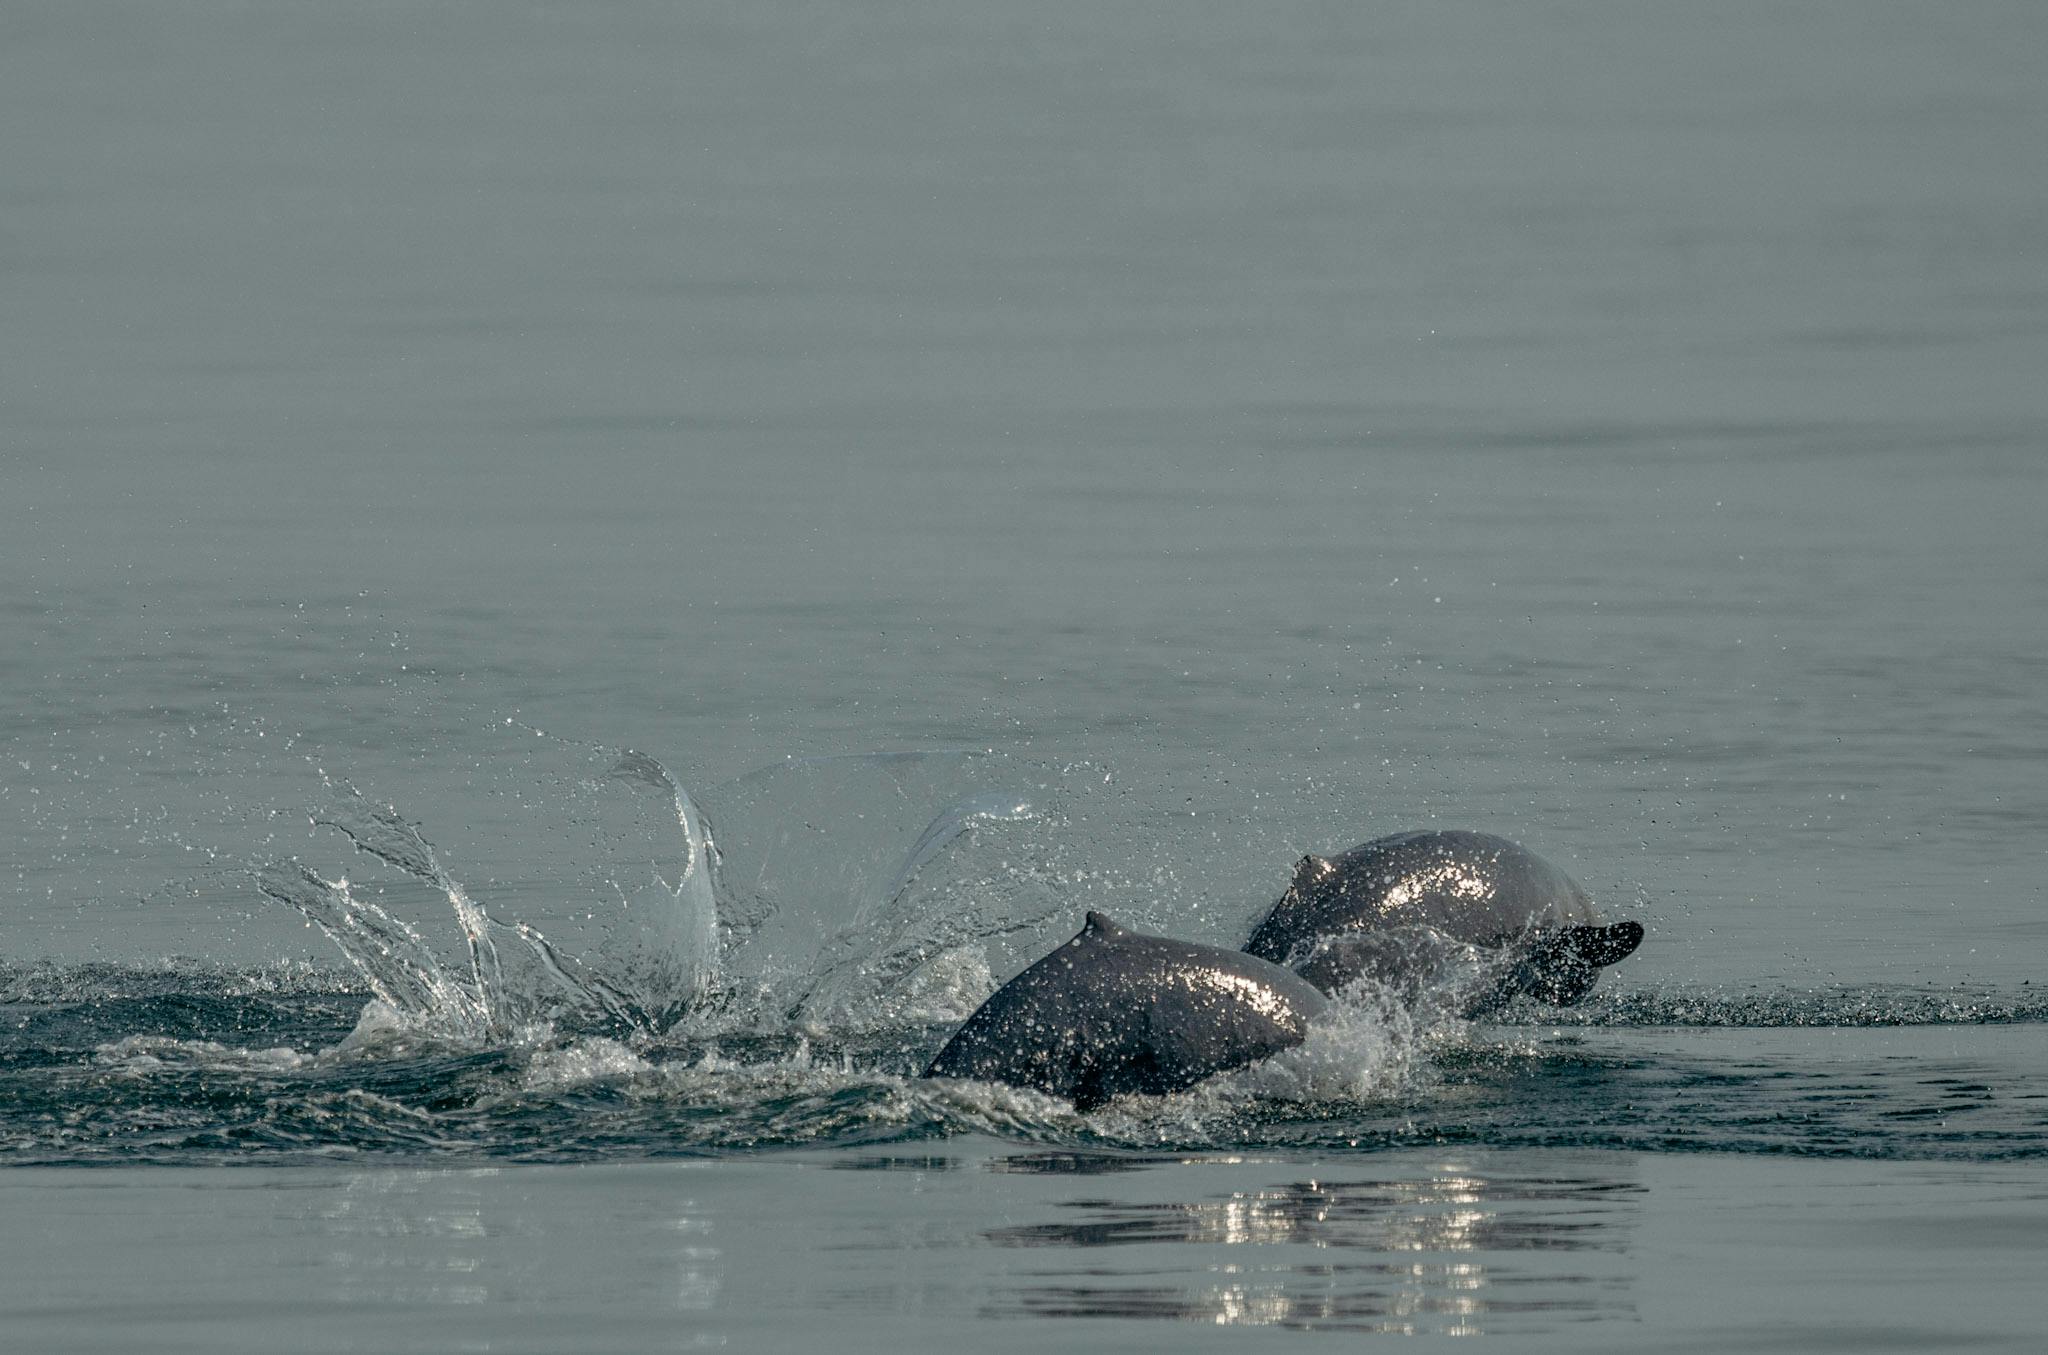 Spot playful Irrawaddy dolphins in the wild